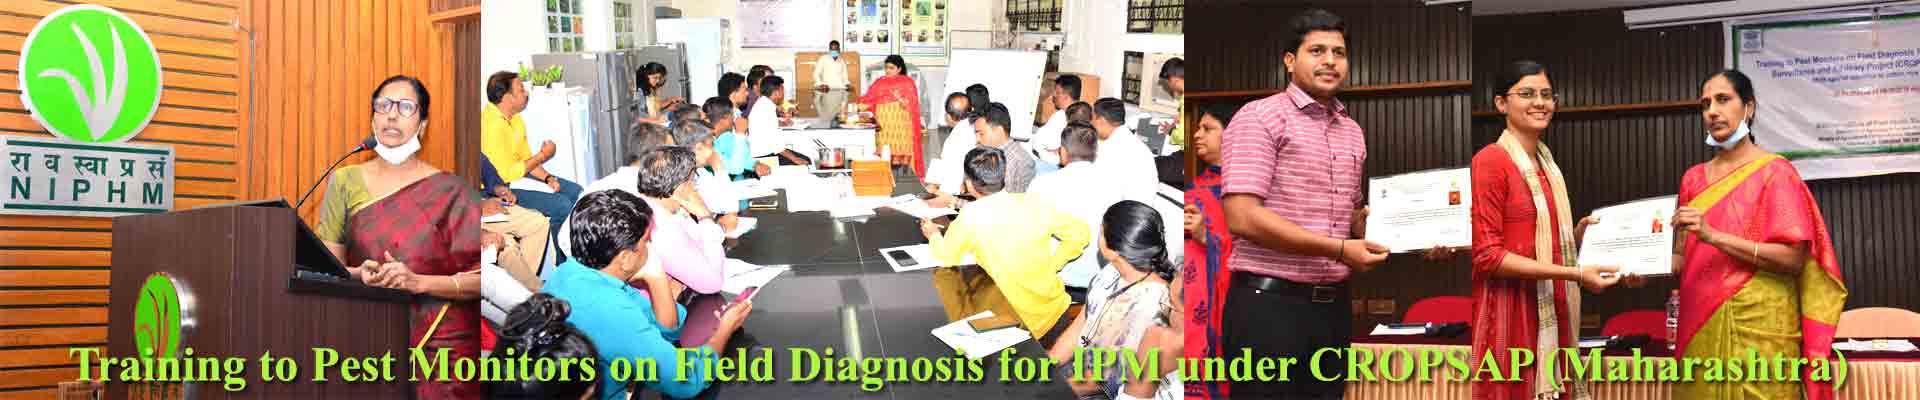 Training to Pest Monitors on Field Diagnosis for IPM under CROPSAP (Maharashtra) @ NIPHM